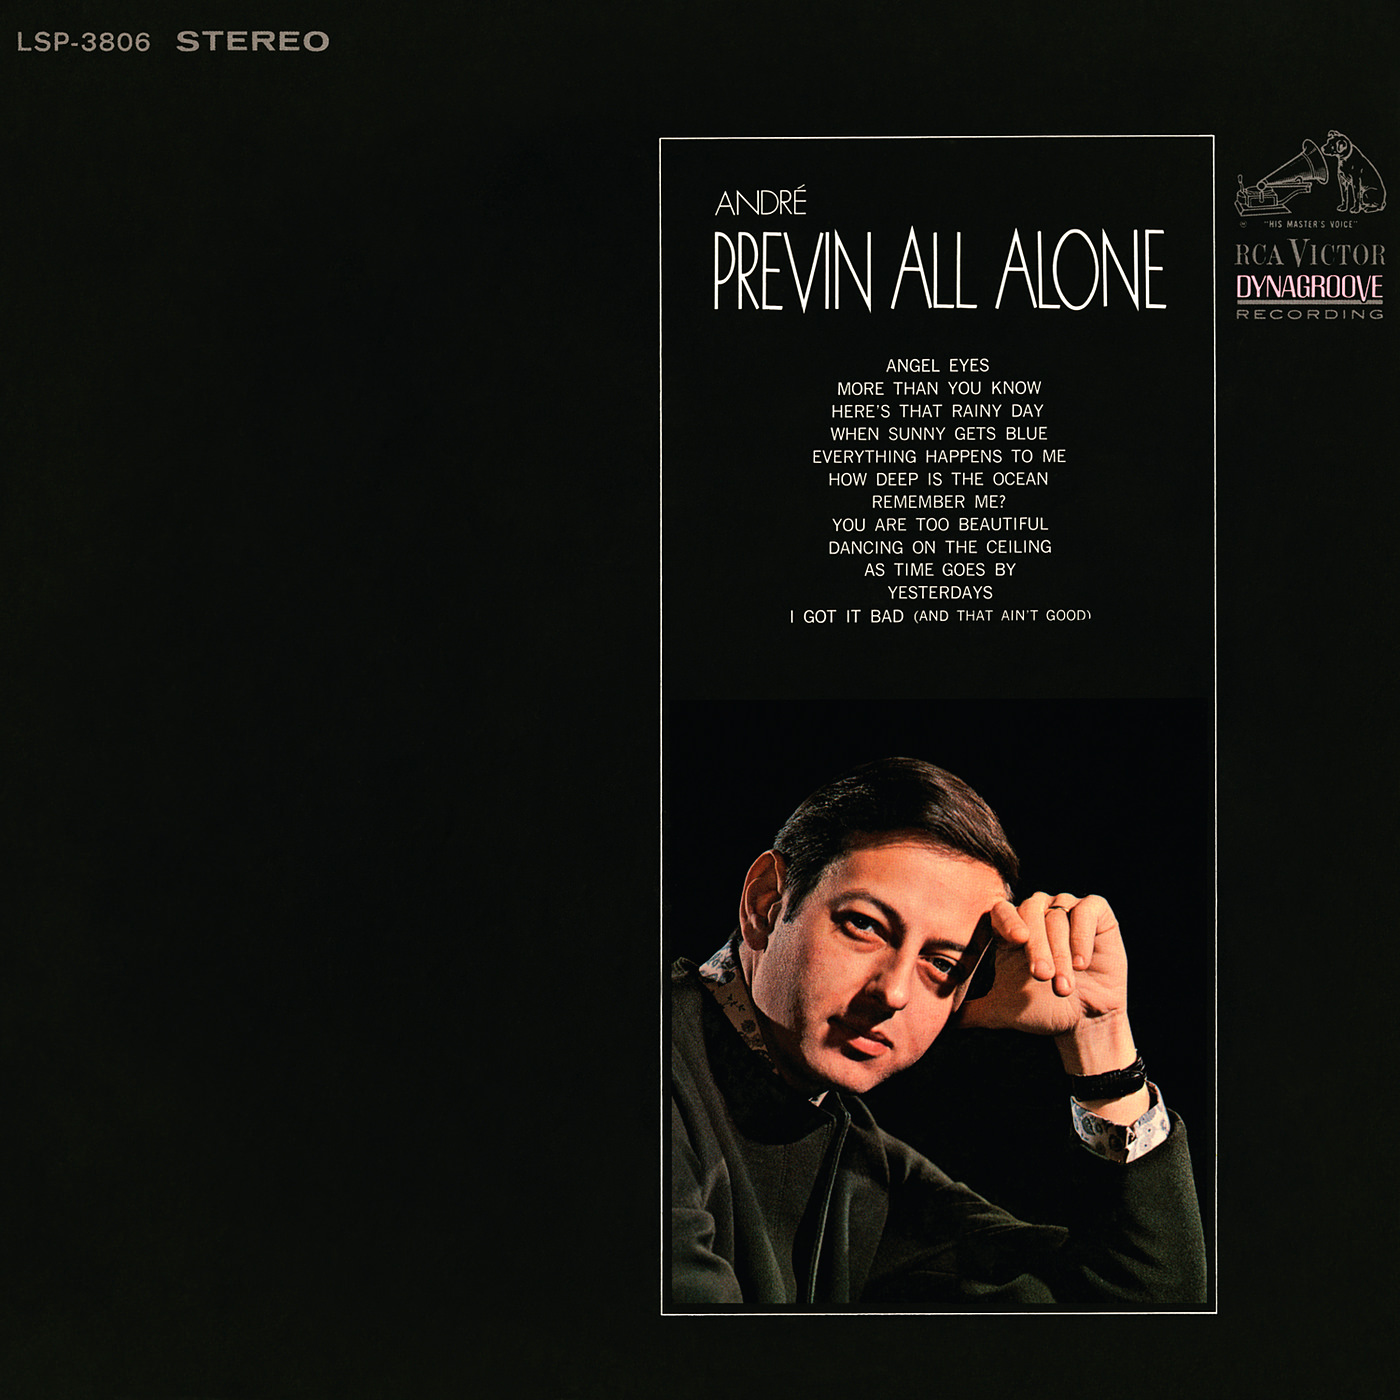 Andre Previn - All Alone (1967/2017) [AcousticSounds FLAC 24bit/192kHz]